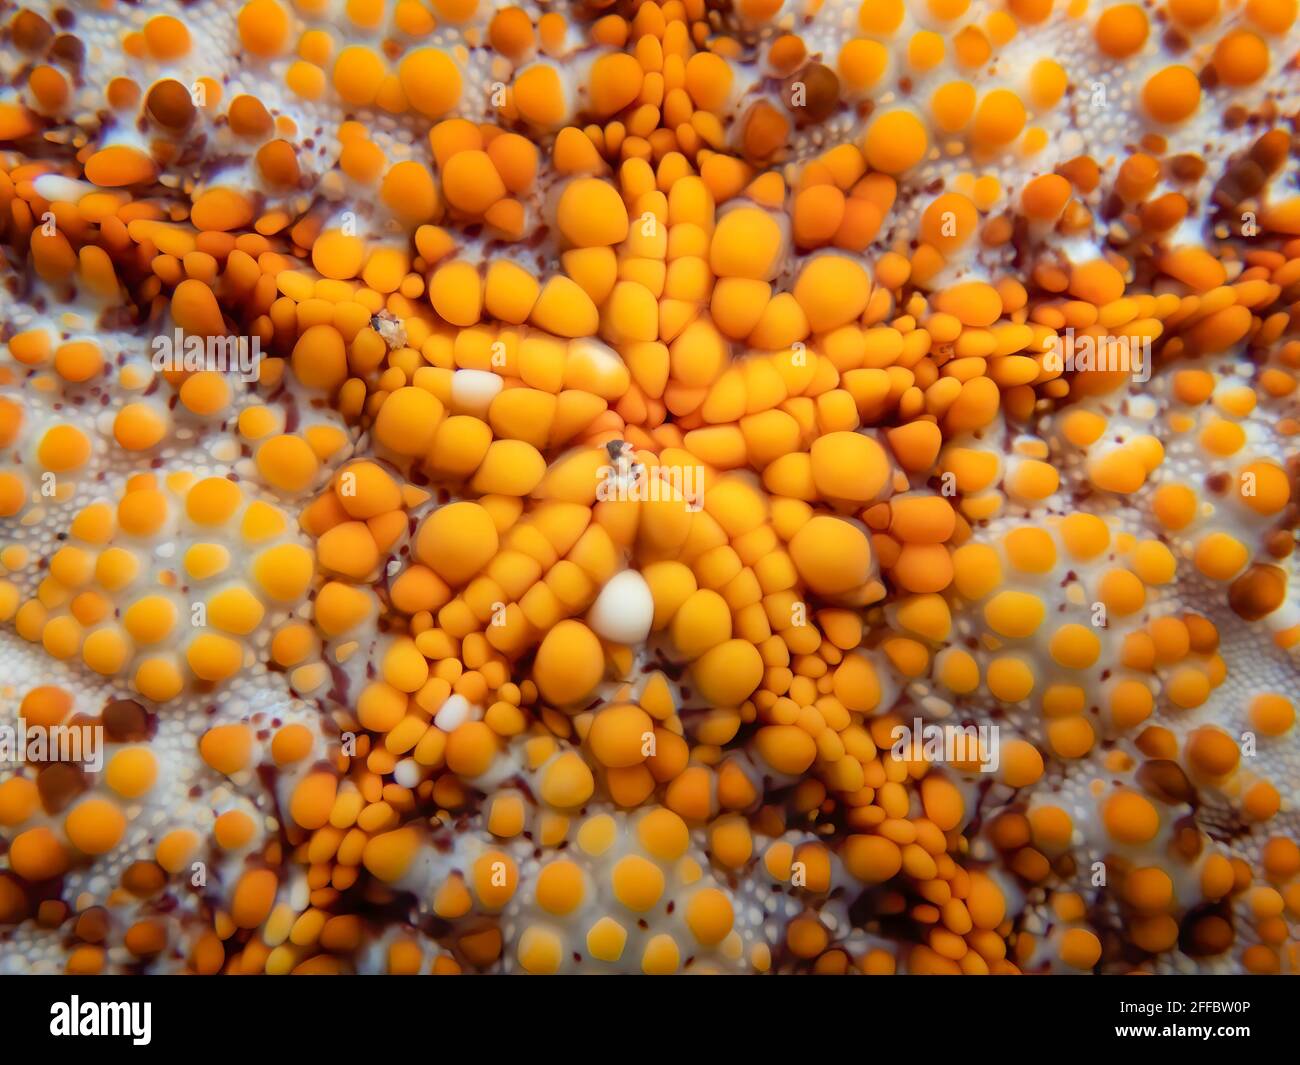 Abstract design in close up detail of cushion sea star with bright orange and white bumps and shapes. Stock Photo